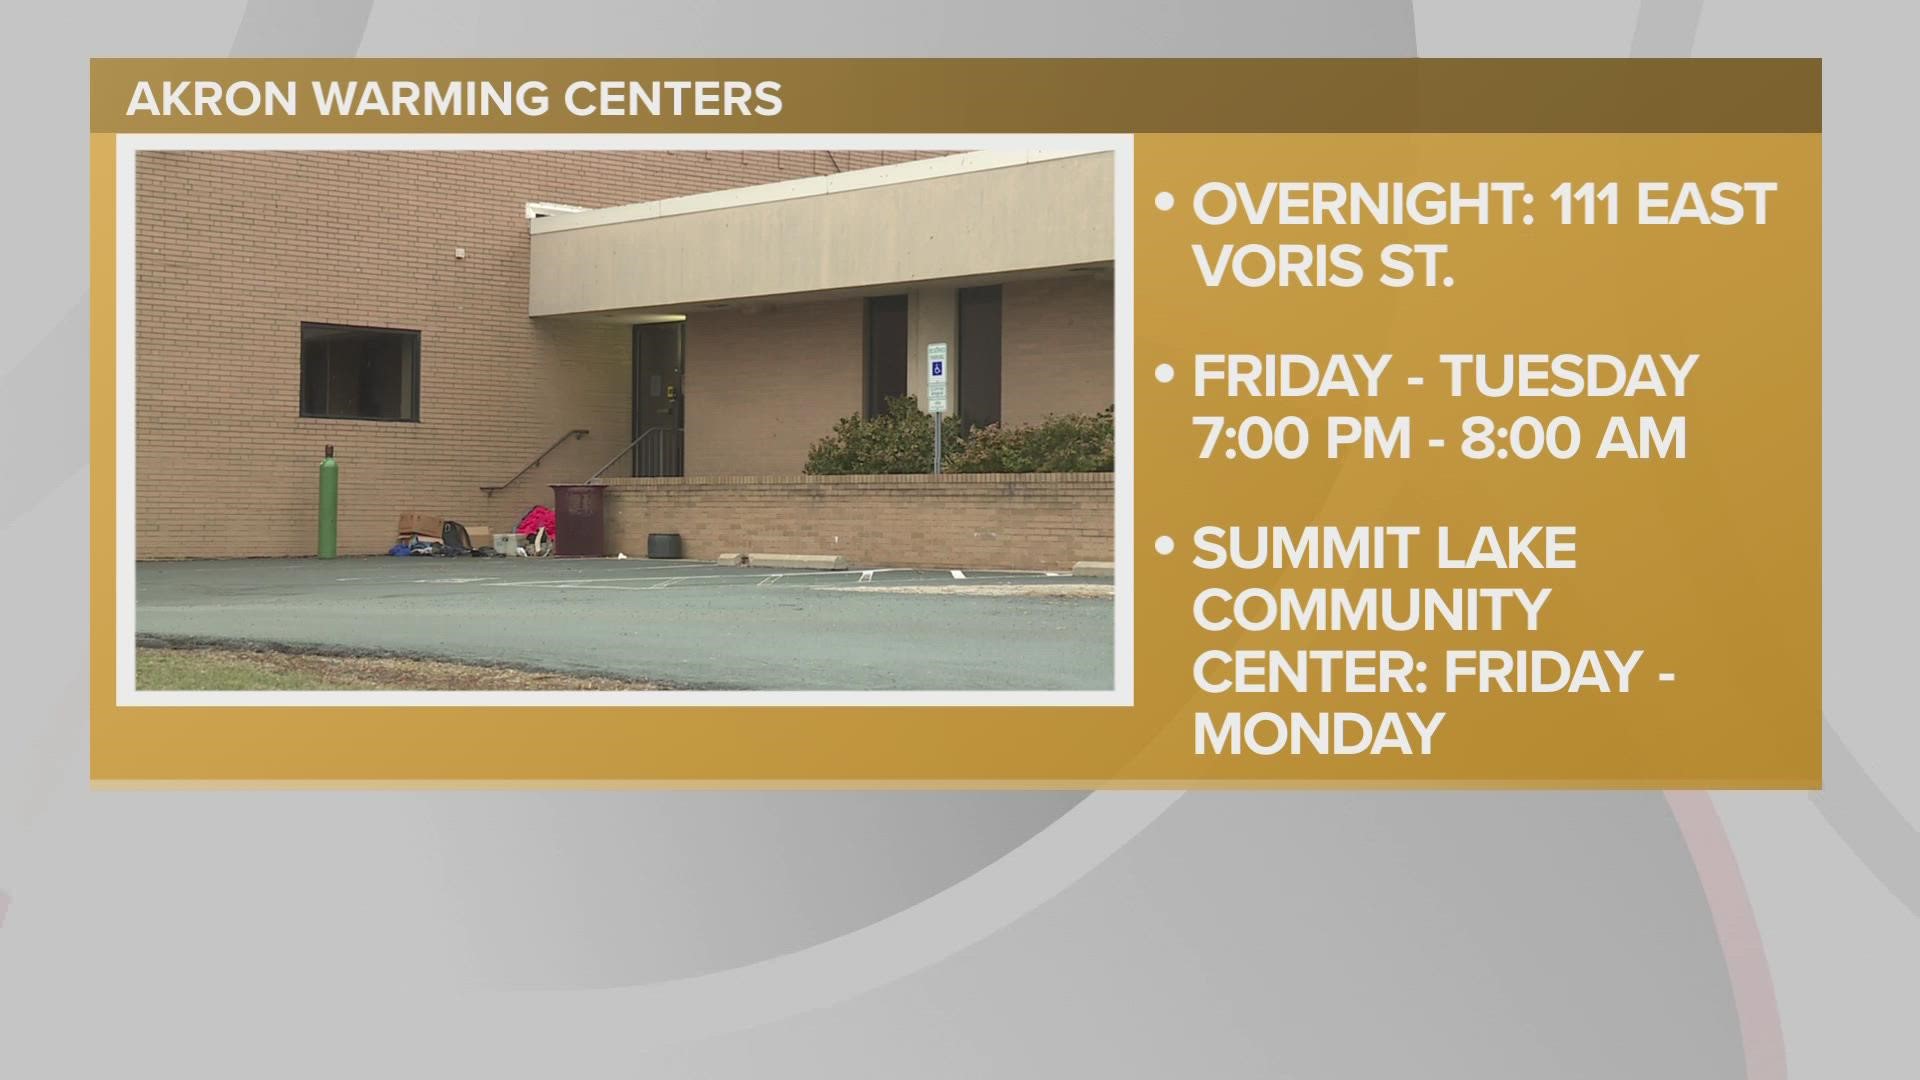 Warming centers in Akron are extending its hours as many prepare for a cold holiday weekend with a winter storm.